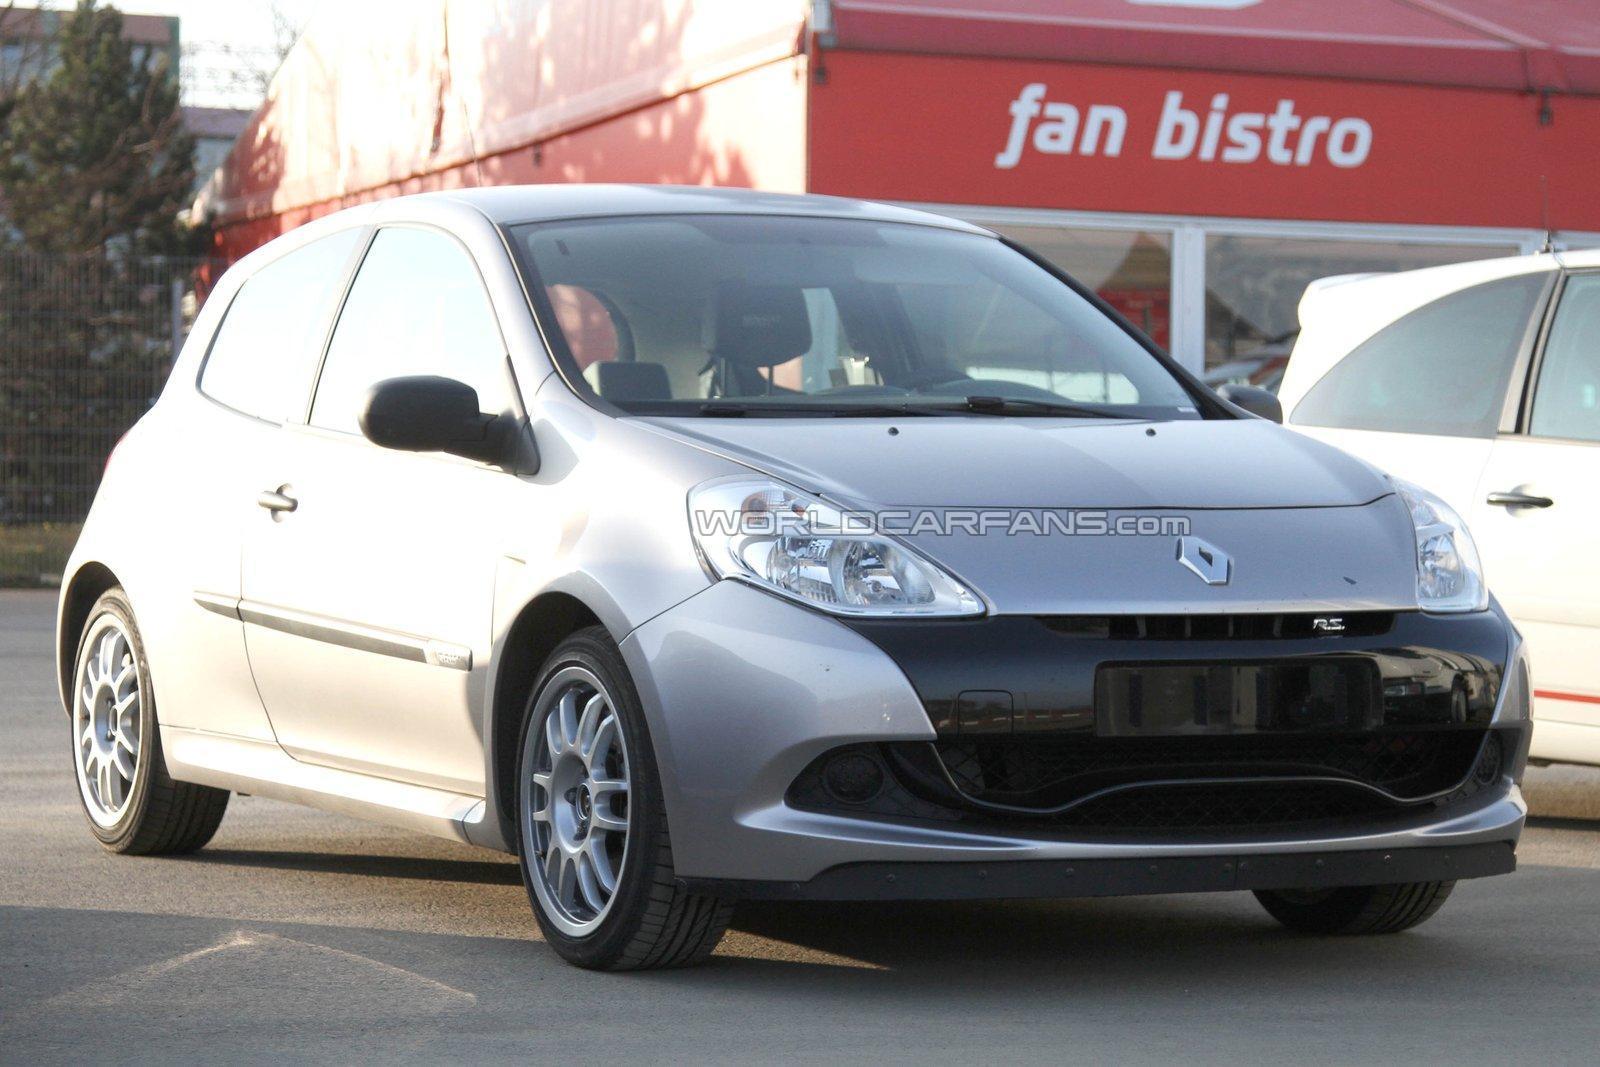 2012 Renault Clio RS spied